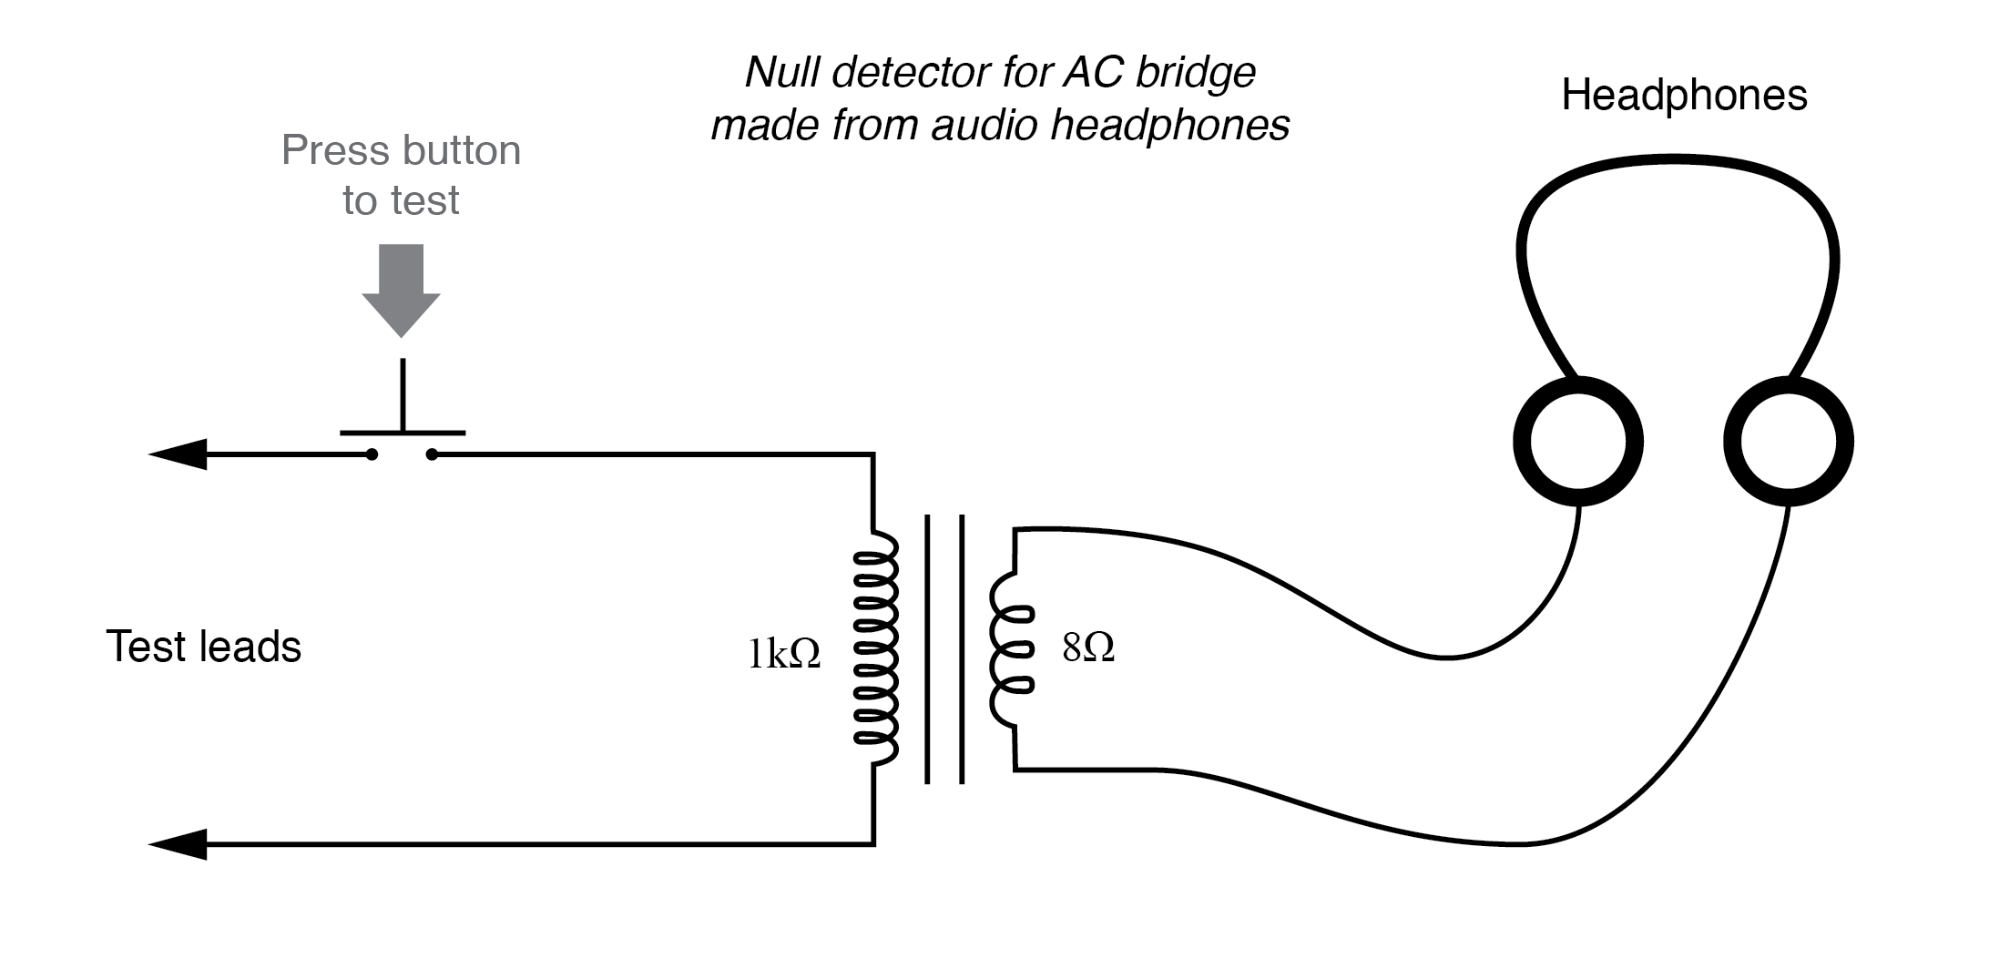 “Modern” low-Ohm headphones require an impedance matching transformer for use as a sensitive null detector.